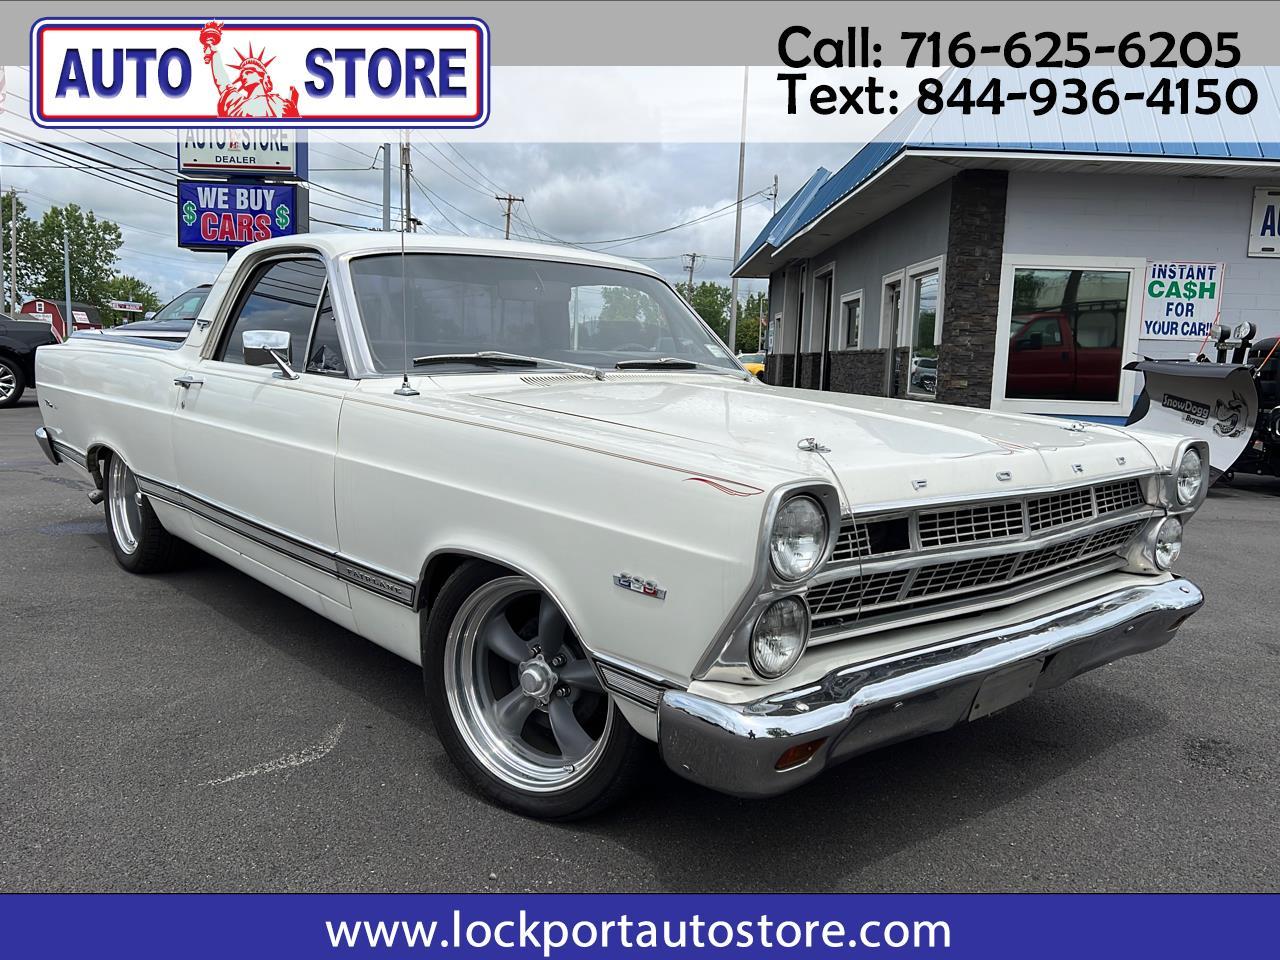 For Sale: 1967 Ford Ranchero in Lockport, New York for sale in Lockport, NY